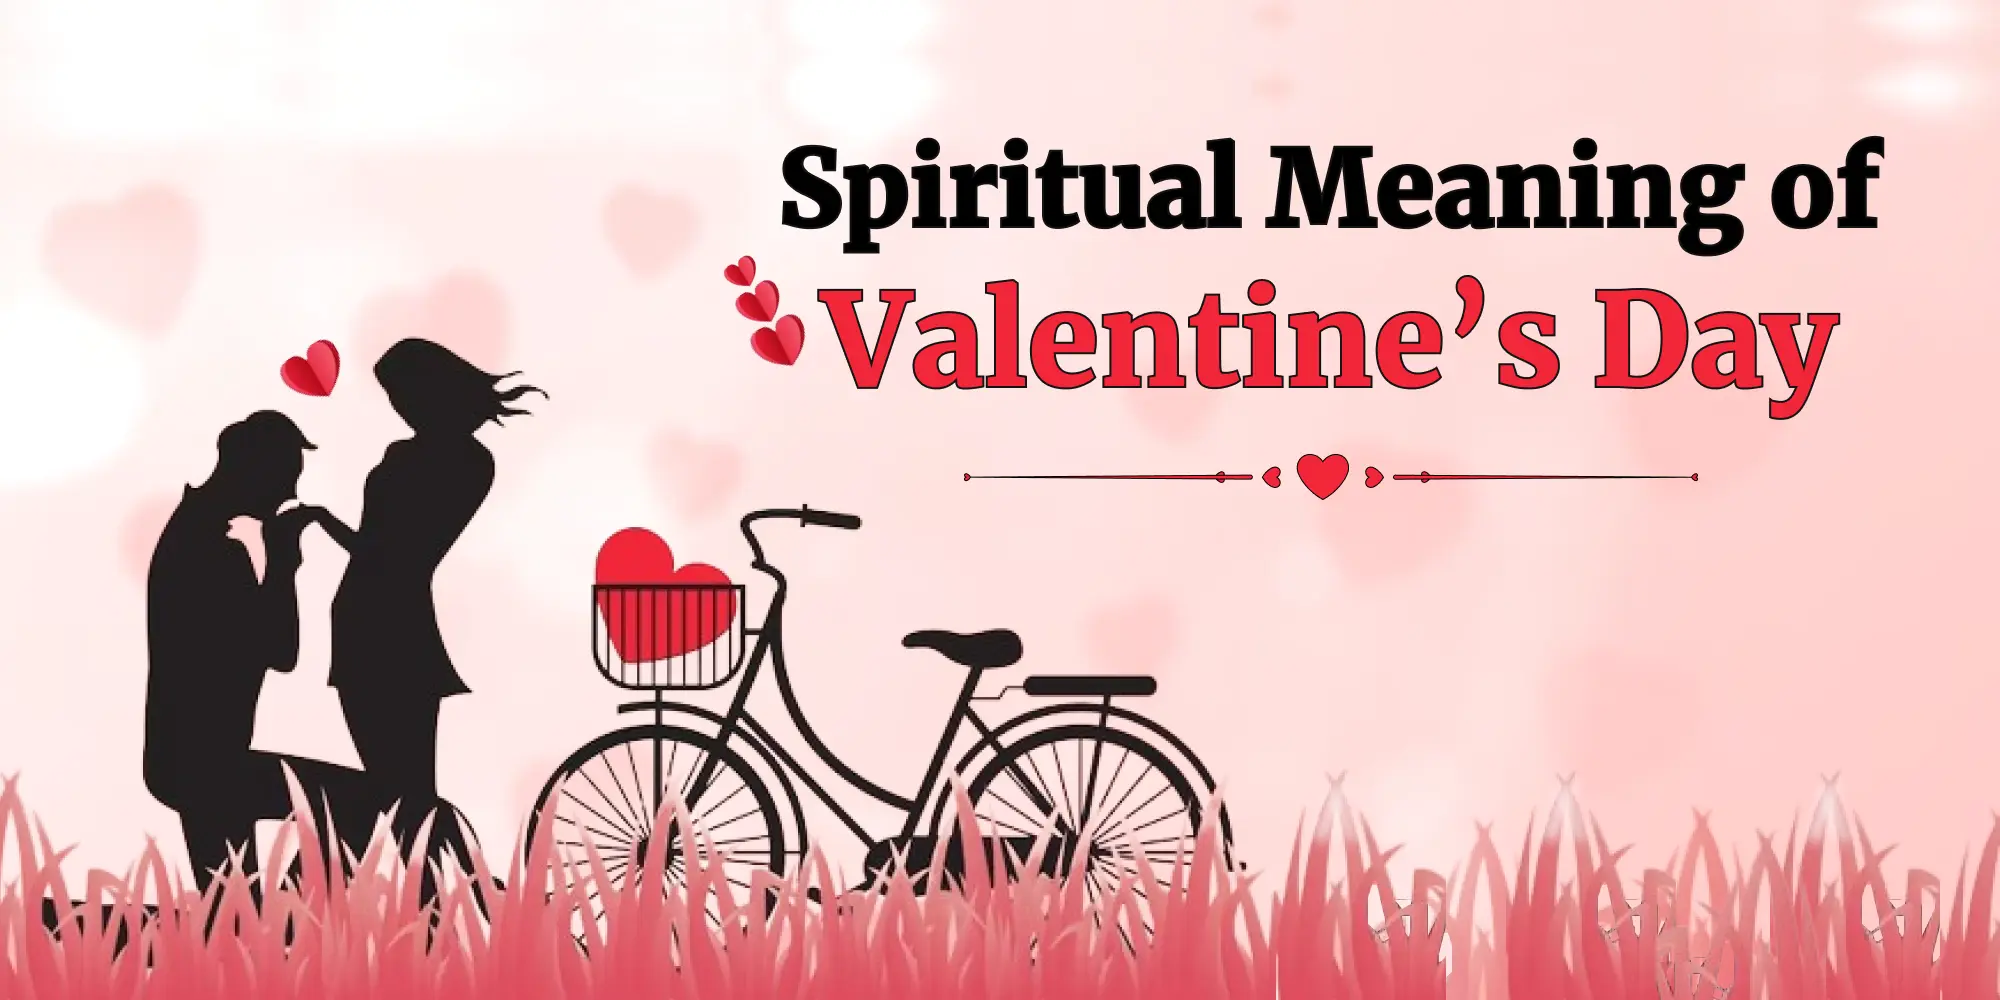 Spiritual Meaning of Valentine’s Day